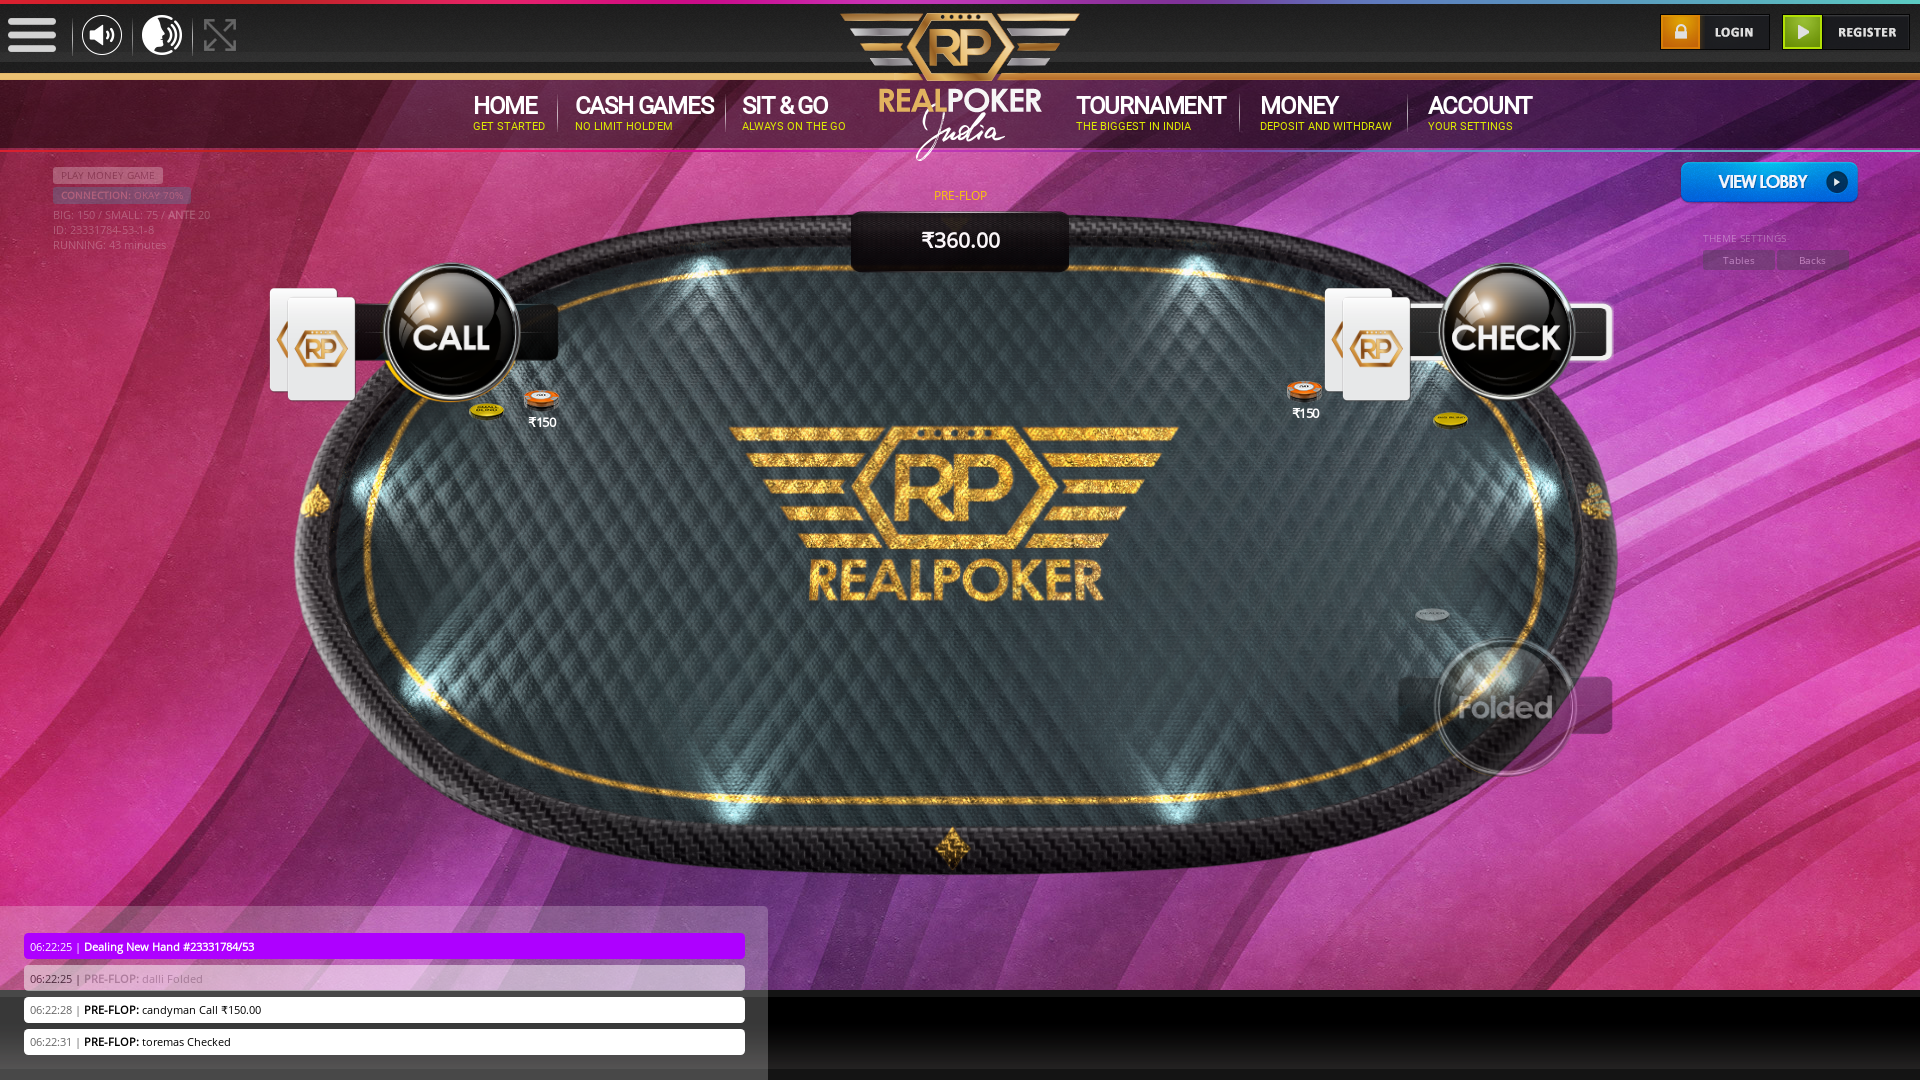 Hoodi, Bangalore online poker game on a 10 player table in the 43rd minute